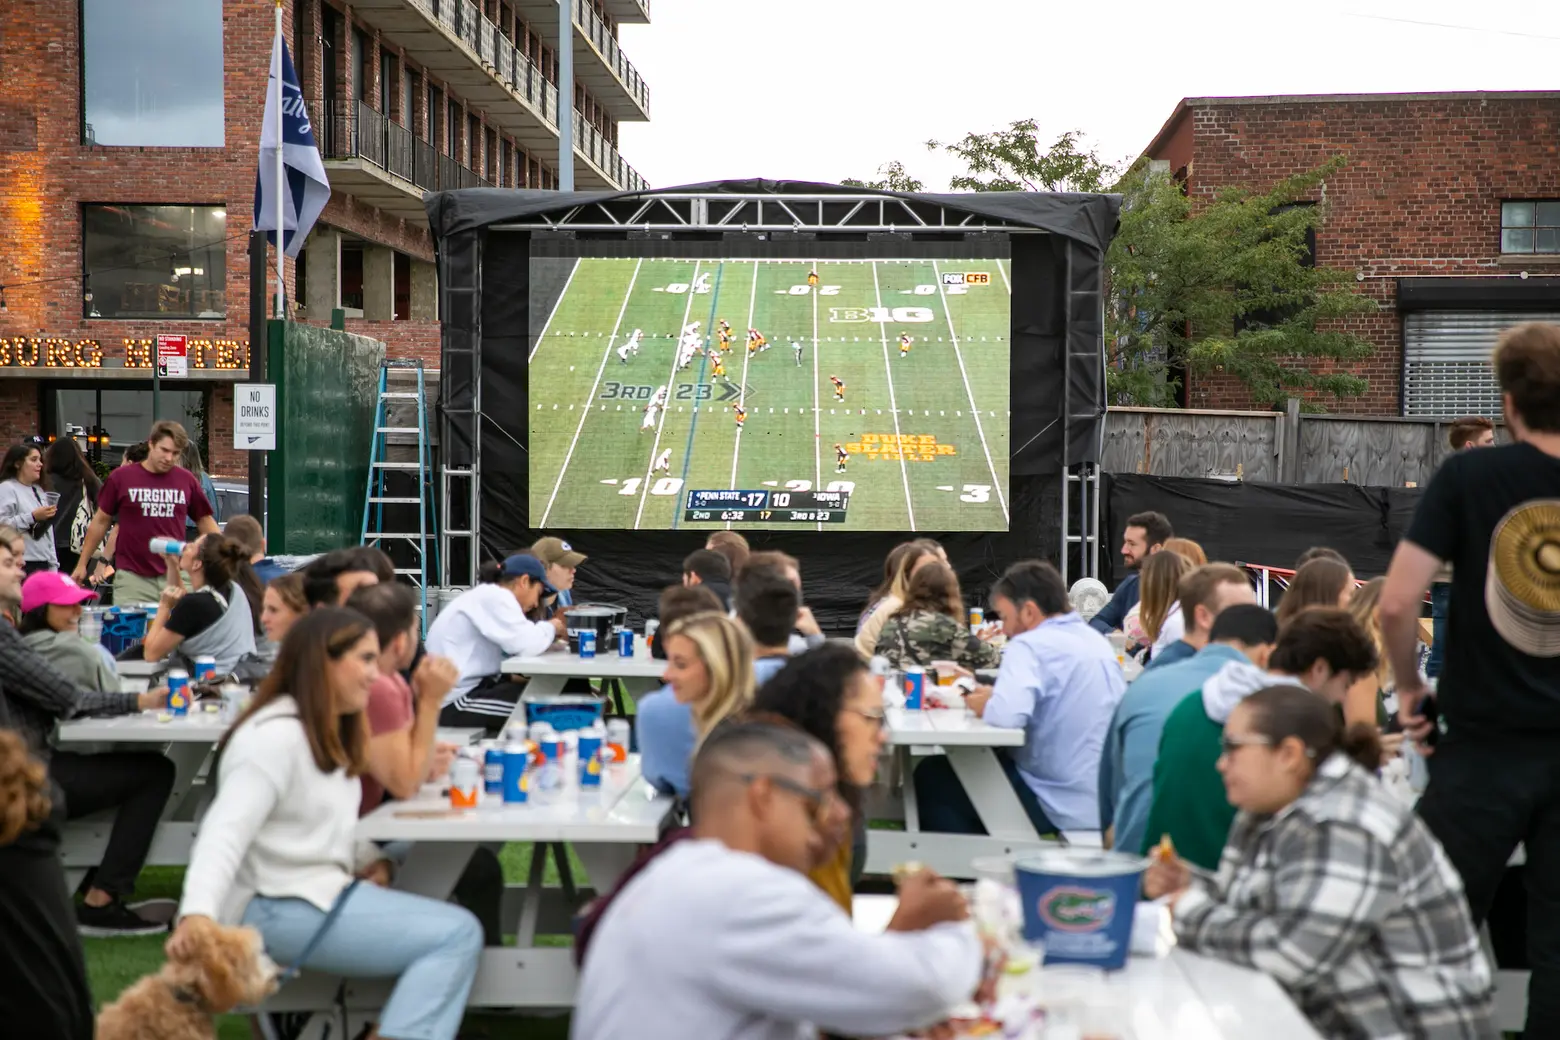 20 best spots to watch the Super Bowl in NYC